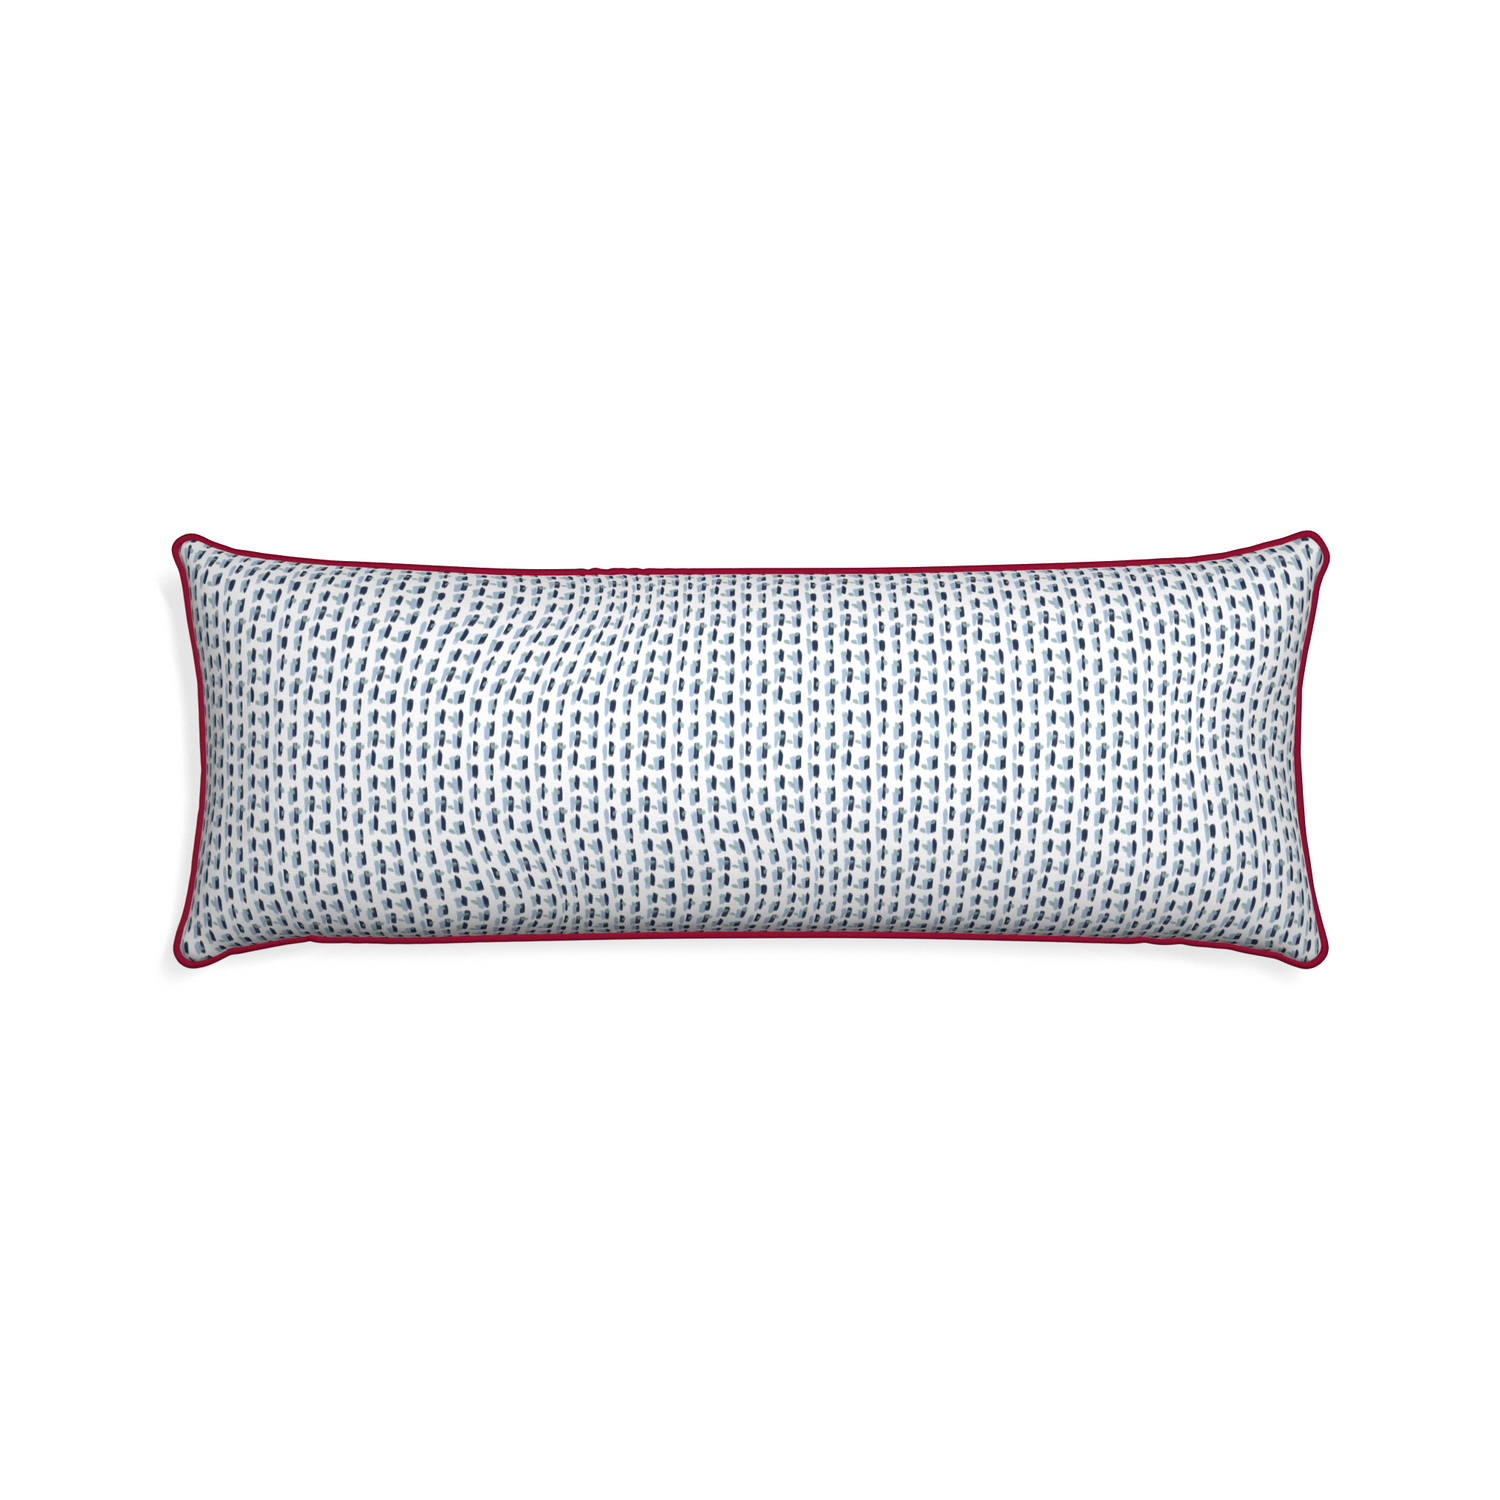 Xl-lumbar poppy blue custom pillow with raspberry piping on white background